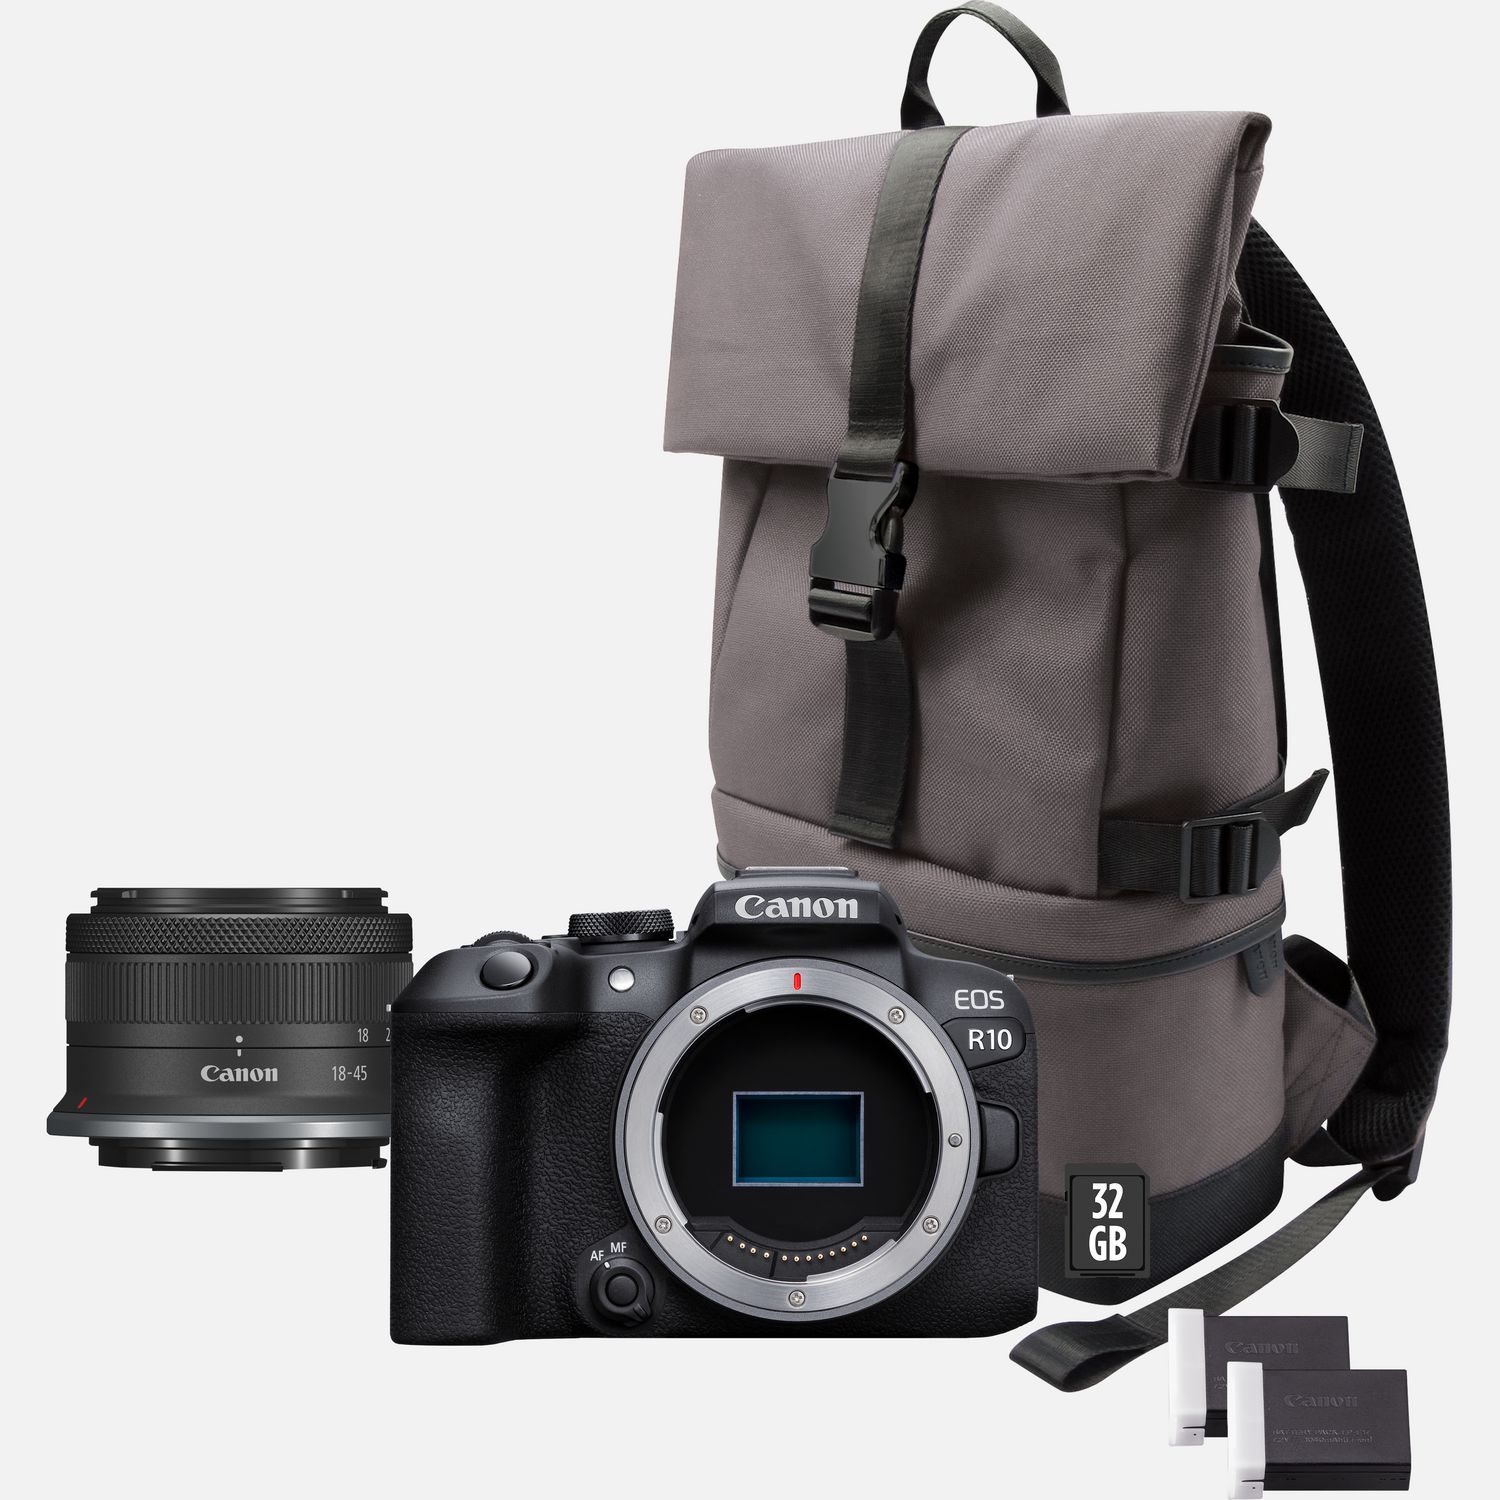 multifunctioneel Overgave Overwegen Canon EOS R10-systeemcamera + RF-S 18-45mm F4.5-6.3 IS STM-lens + backpack  + SD-kaart + reserveaccu in Wifi-camera's — Canon Nederland Store